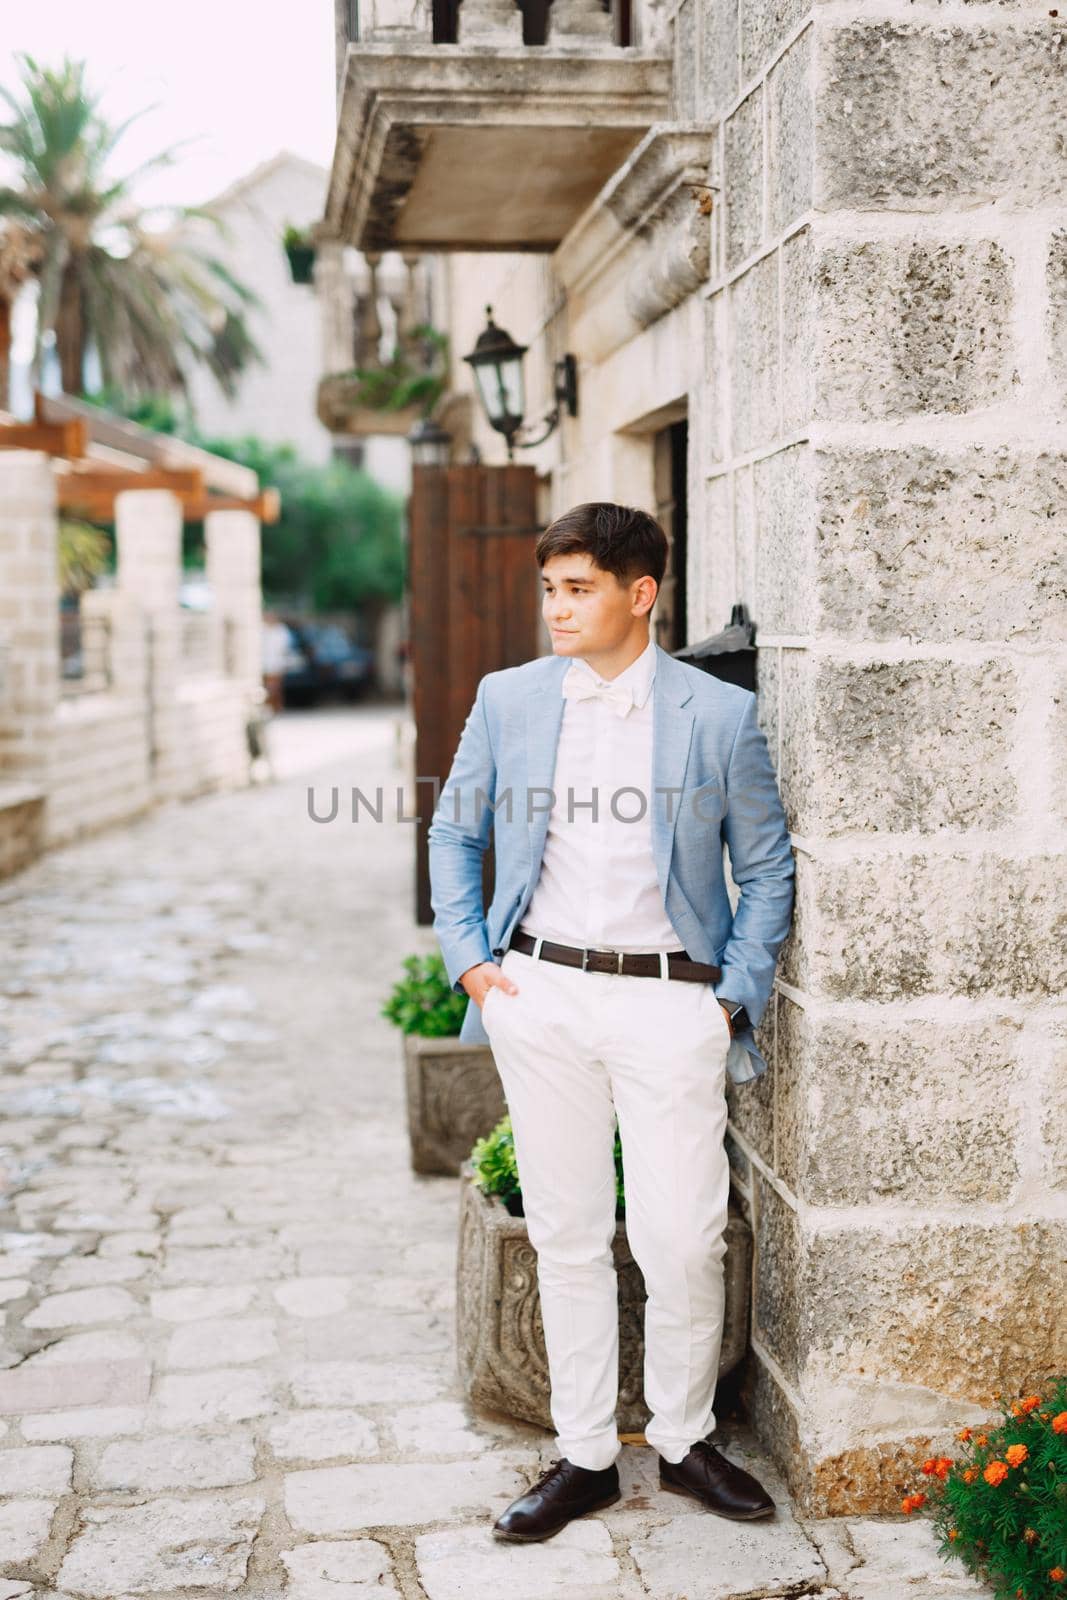 A man in a blue jacket with a bow tie stands in front of an ancient building, holding his hands in his pockets by Nadtochiy